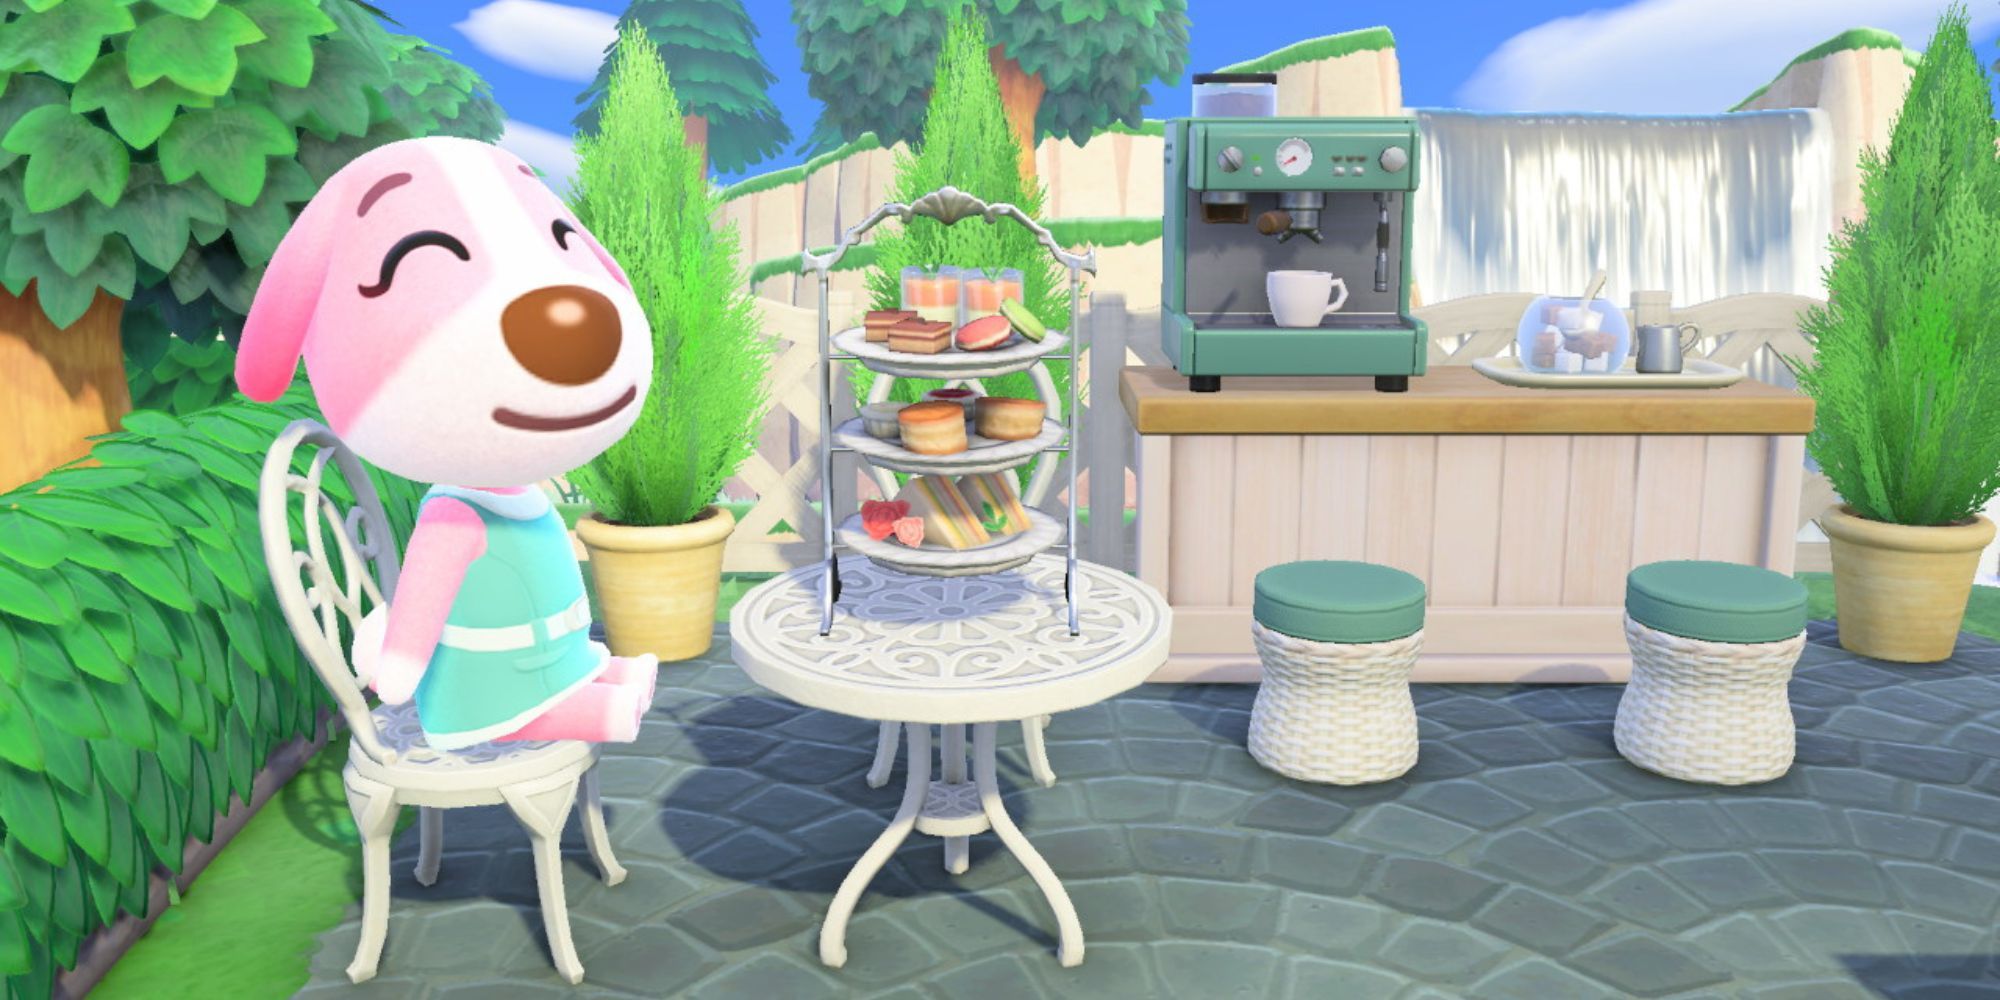 Cookie sits outside beside a table with treats on it